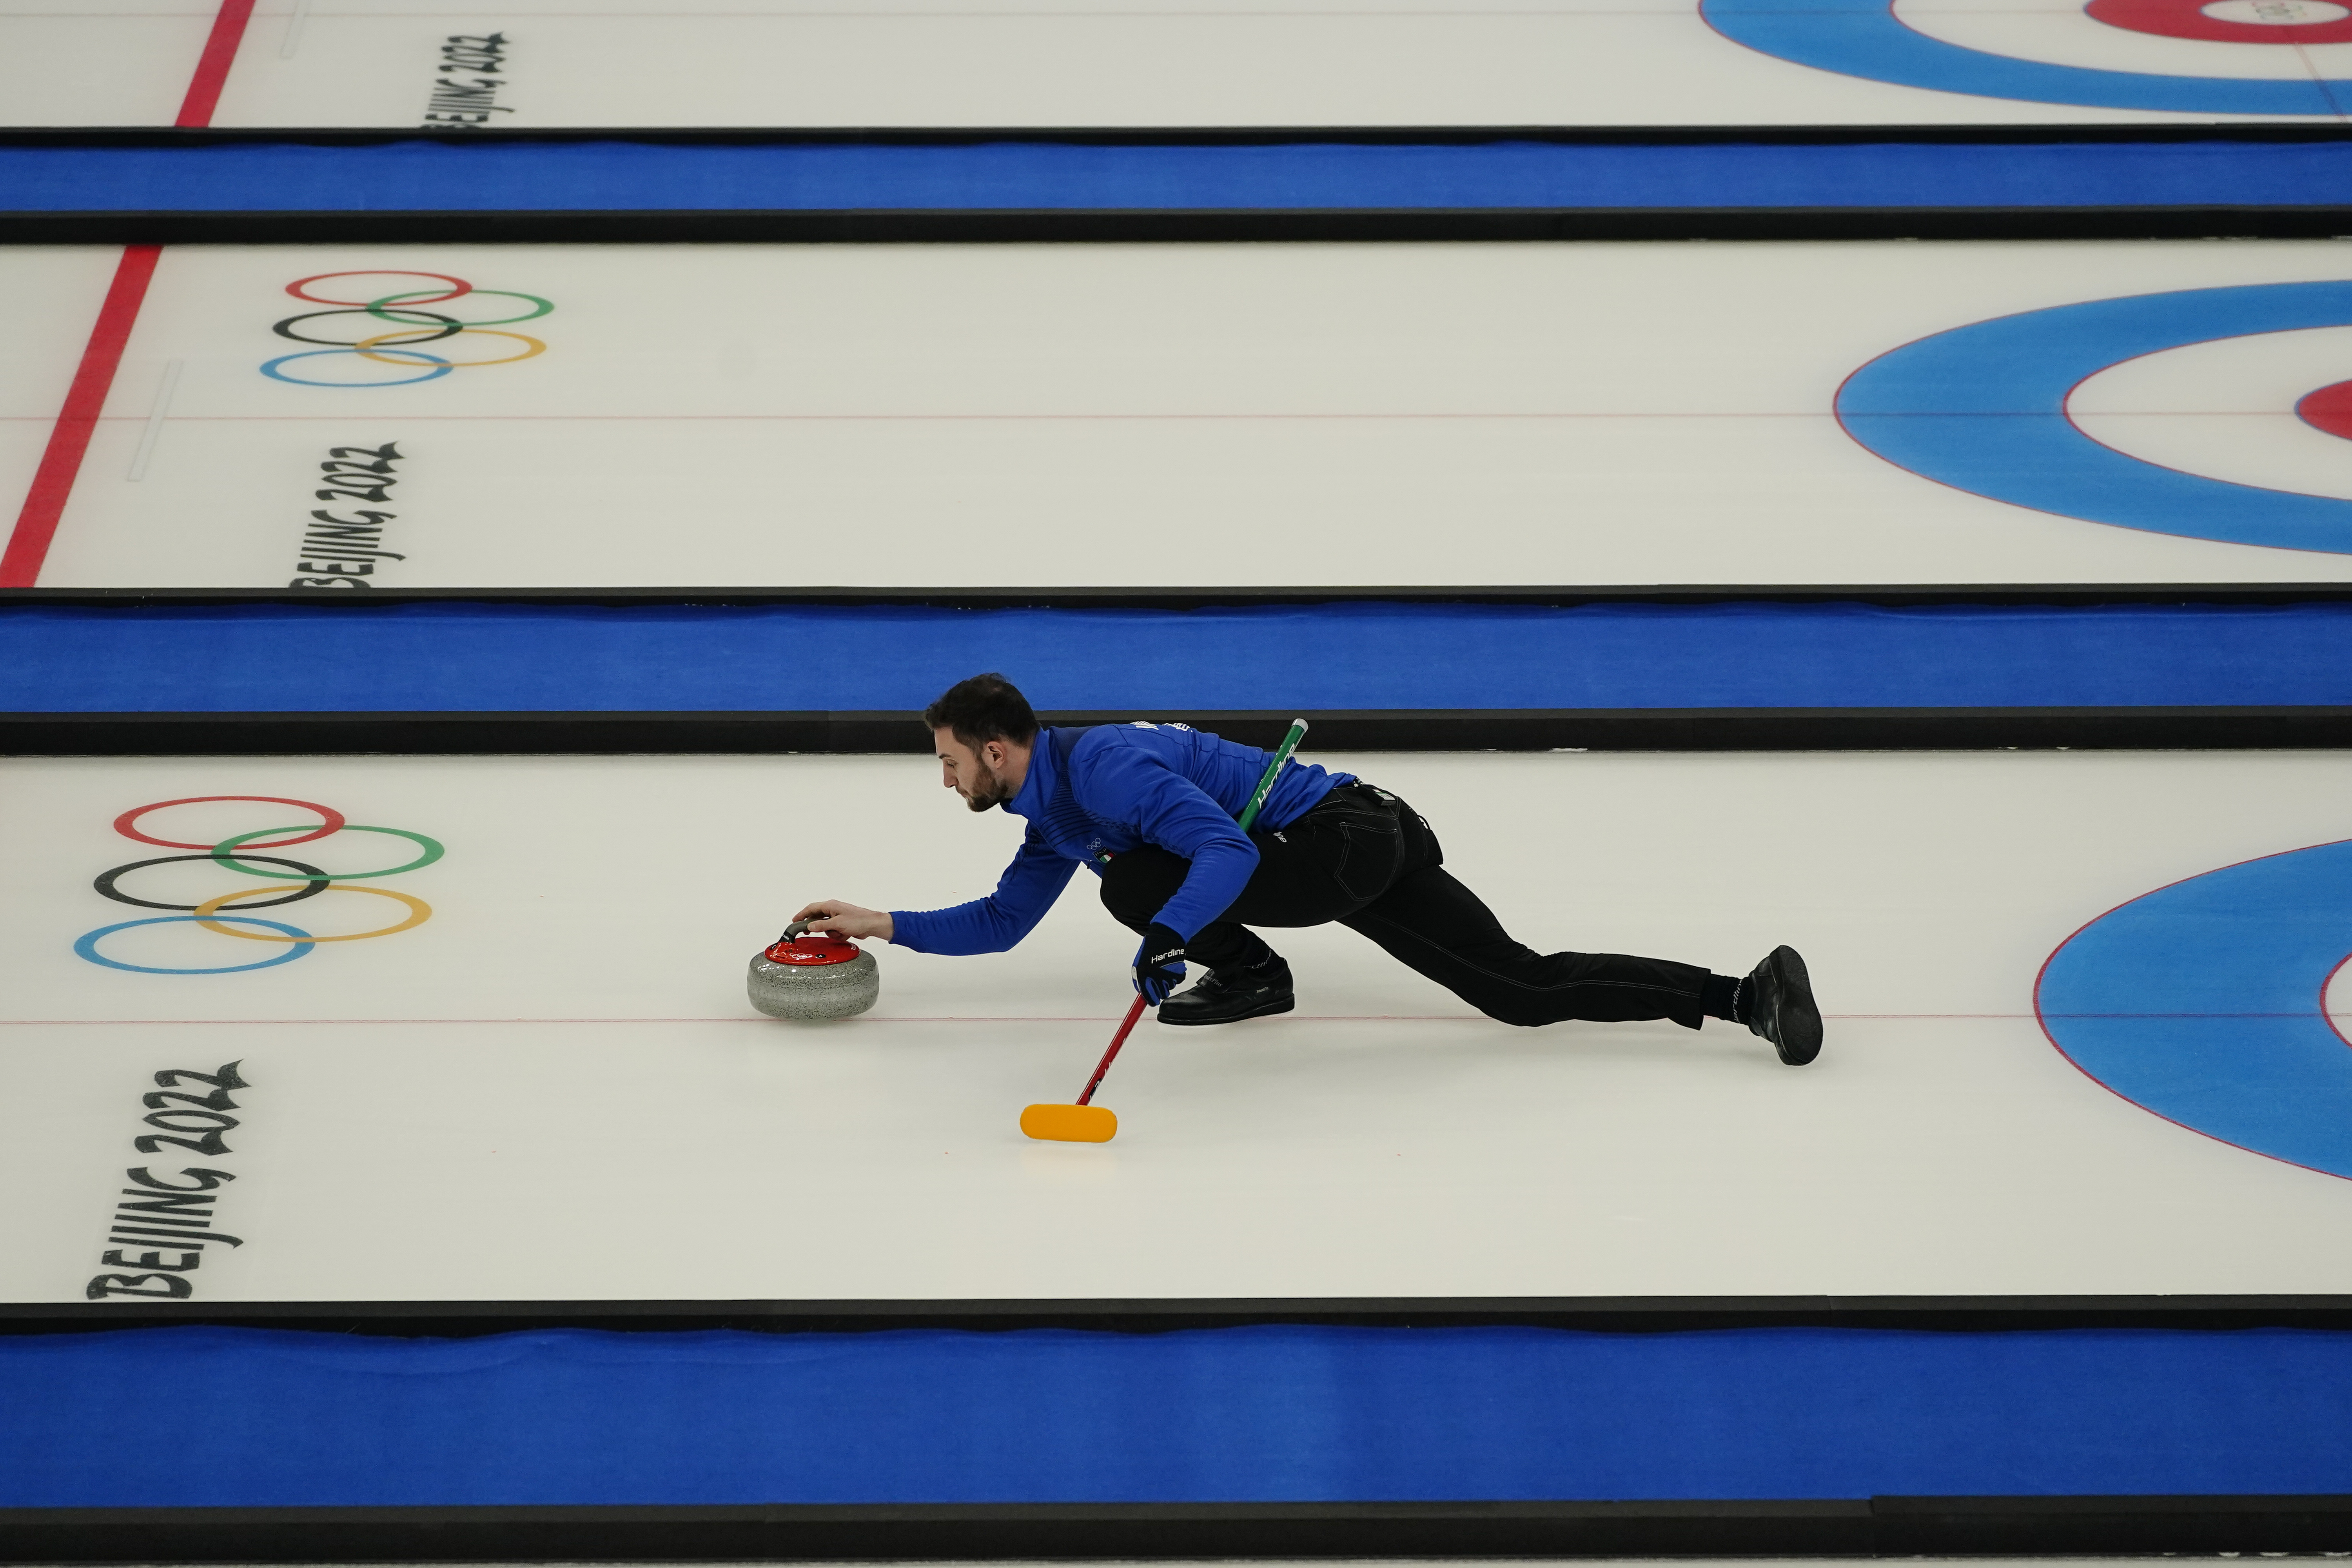 How to watch Team USA Curling at Winter Olympics 2022 Full schedule, live stream, channels